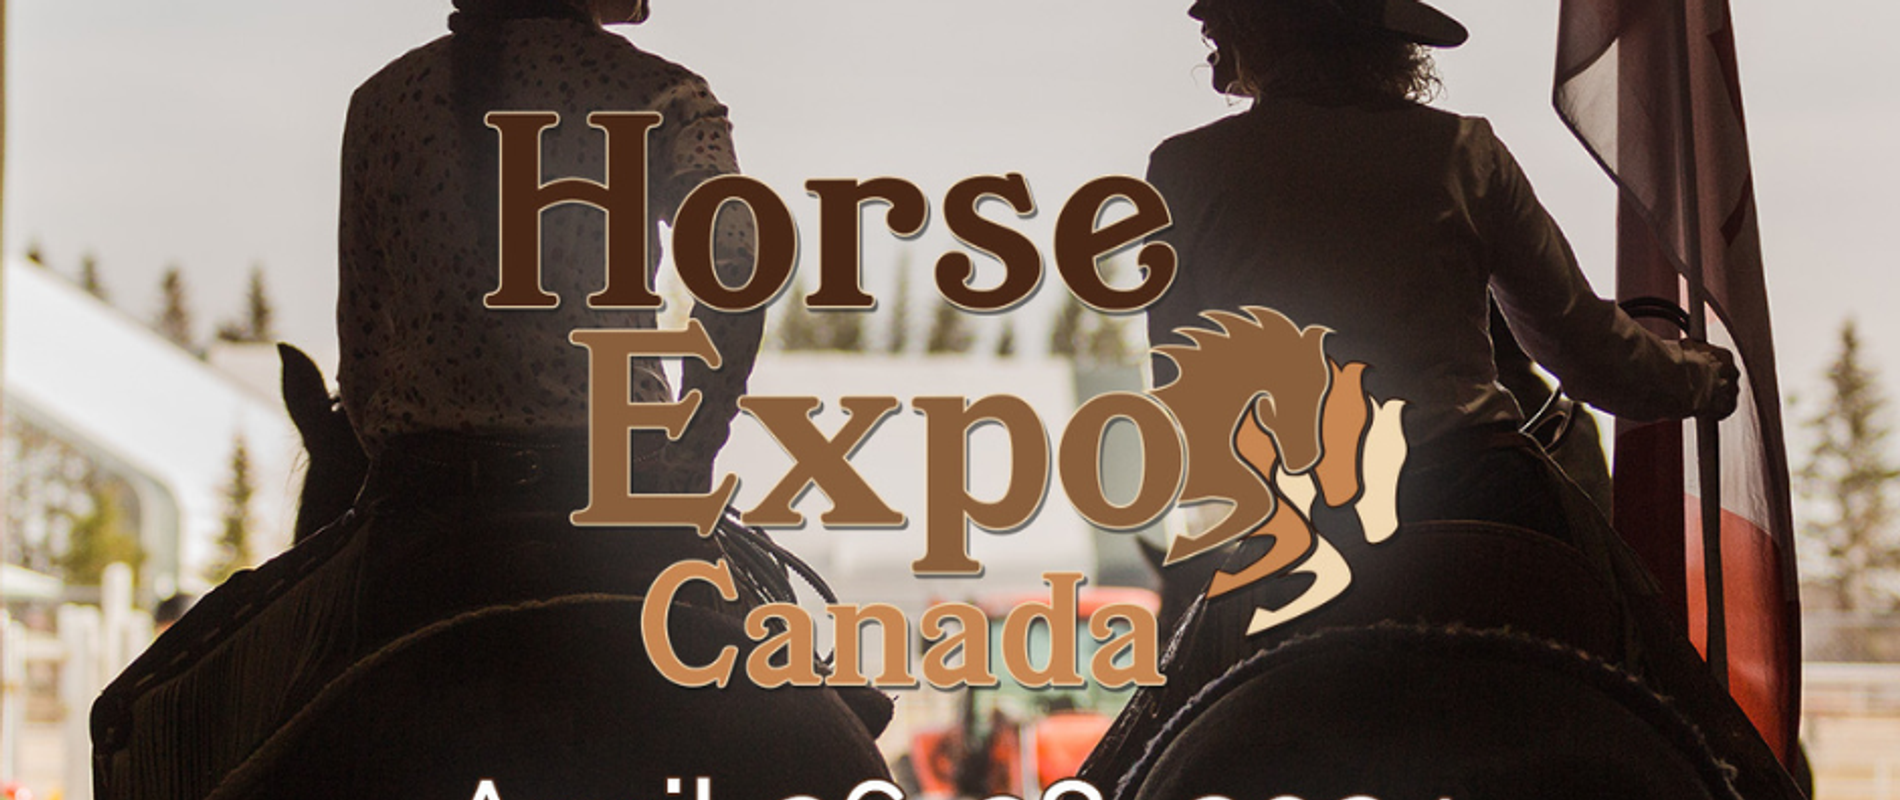 Silhouette of two riders and the words "Horse Expo Canada"